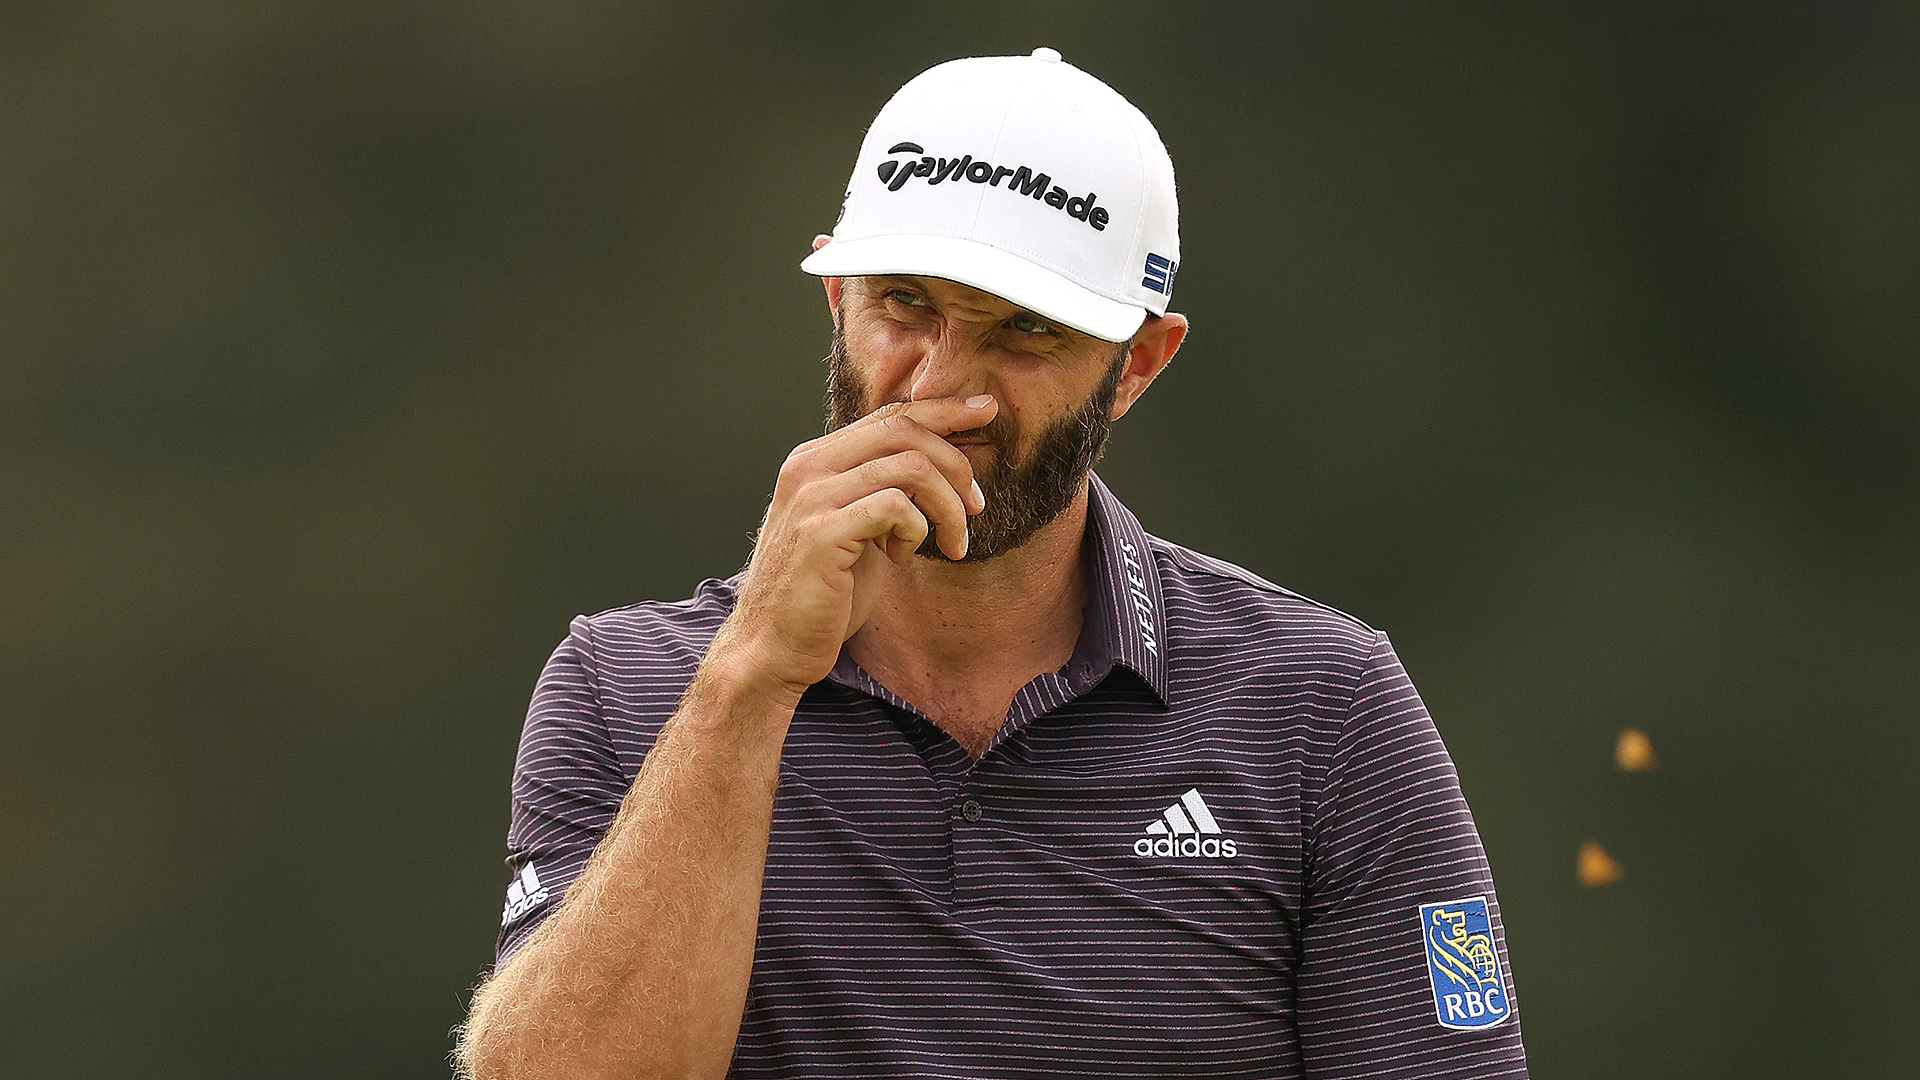 Dustin Johnson Left Behind, Already 8 Shots Back After Opening 73 at U.S. Open